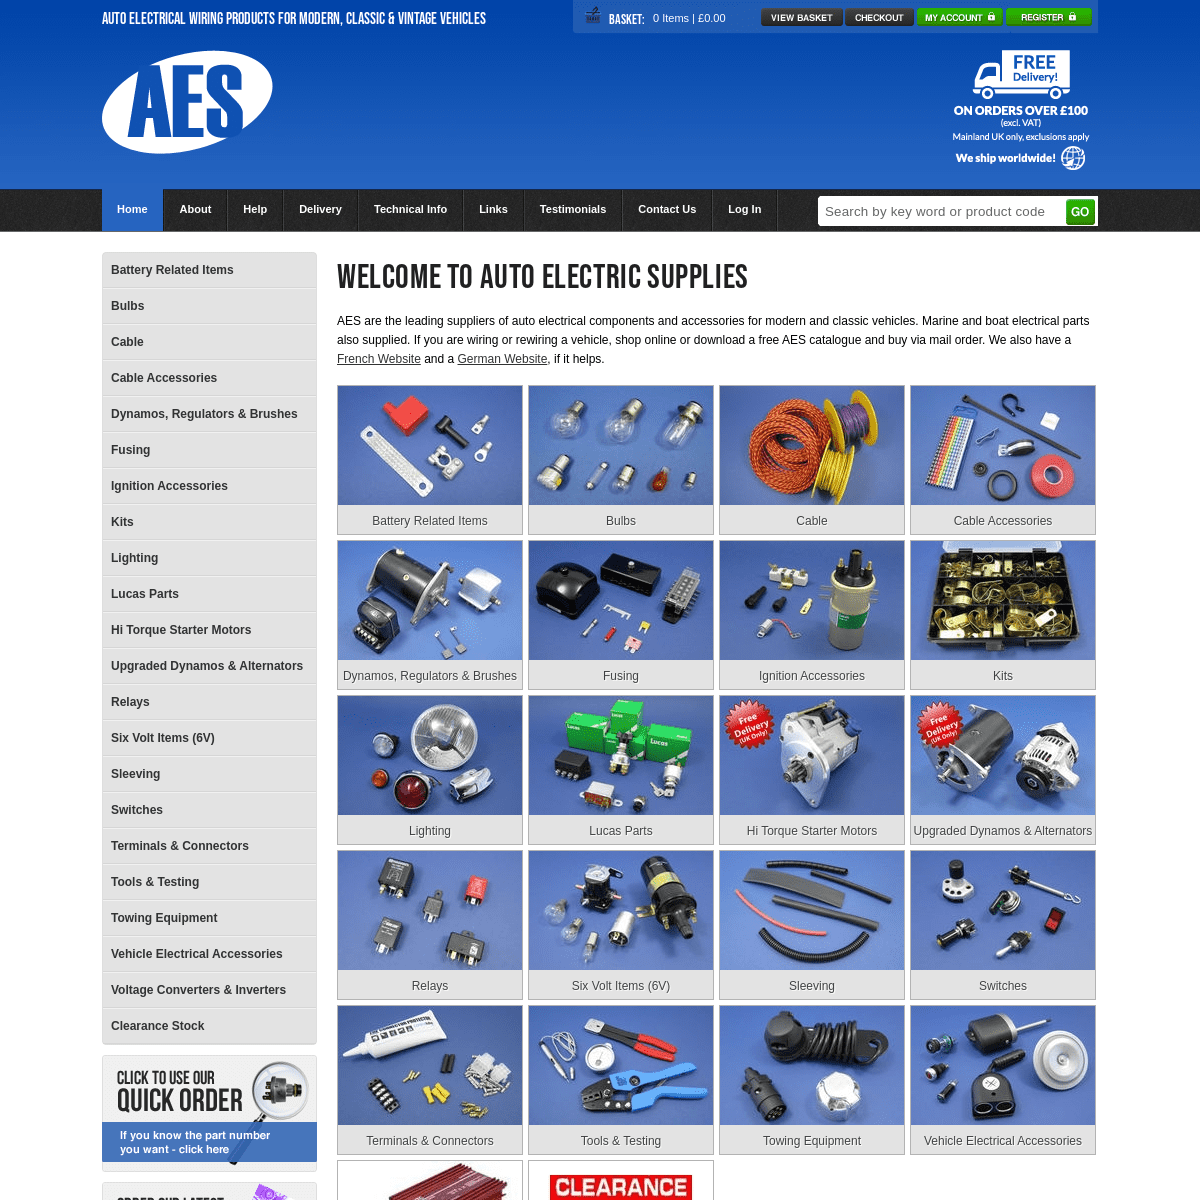 A complete backup of https://autoelectricsupplies.co.uk